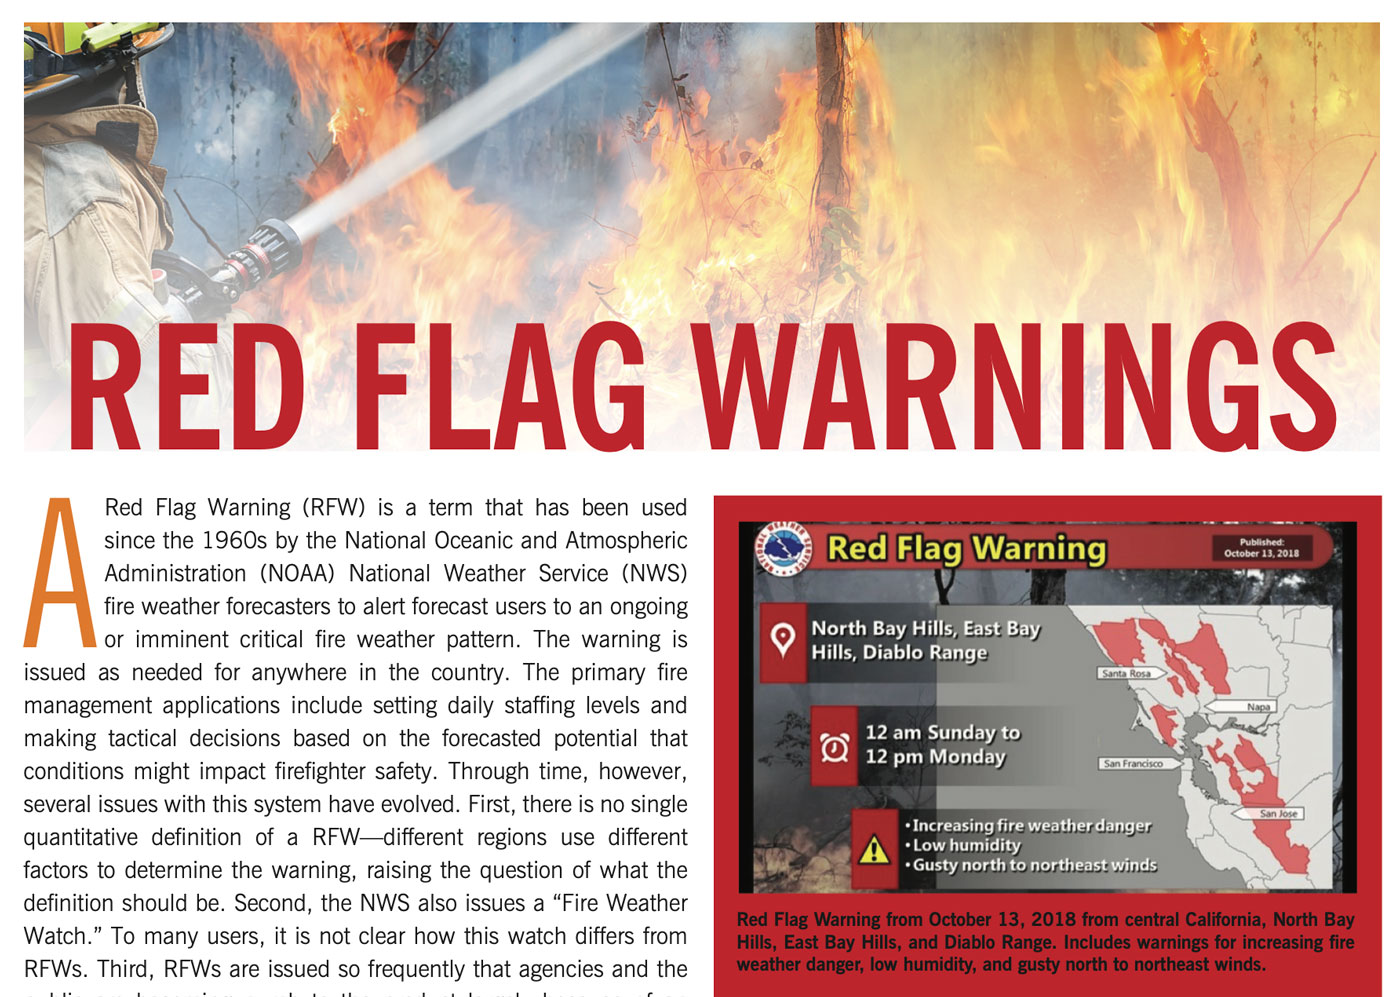 Addressing Challenges in Effective Red Flag Warning, May 27, 2020